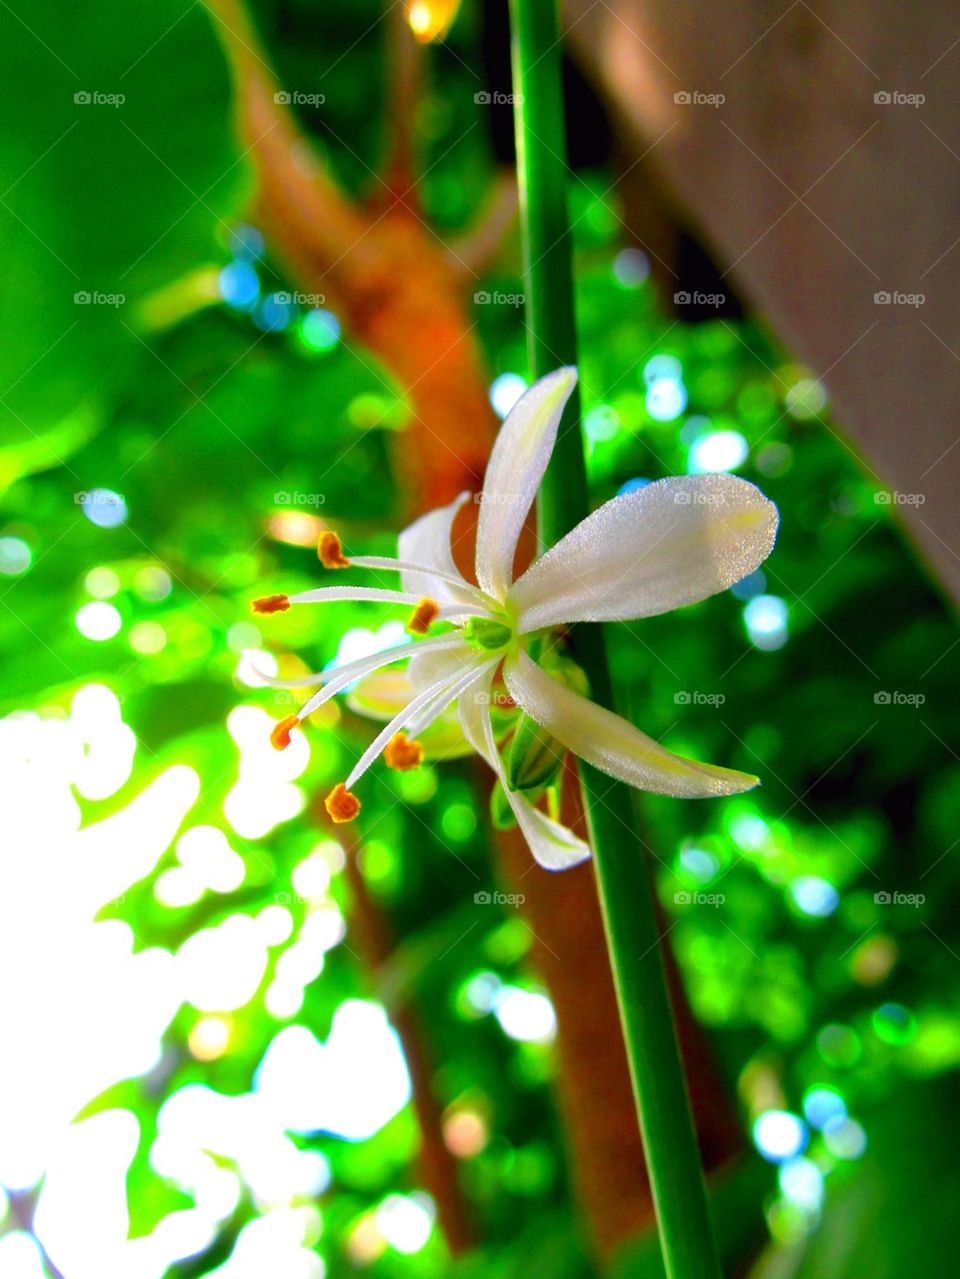 Spider plant fall bloom